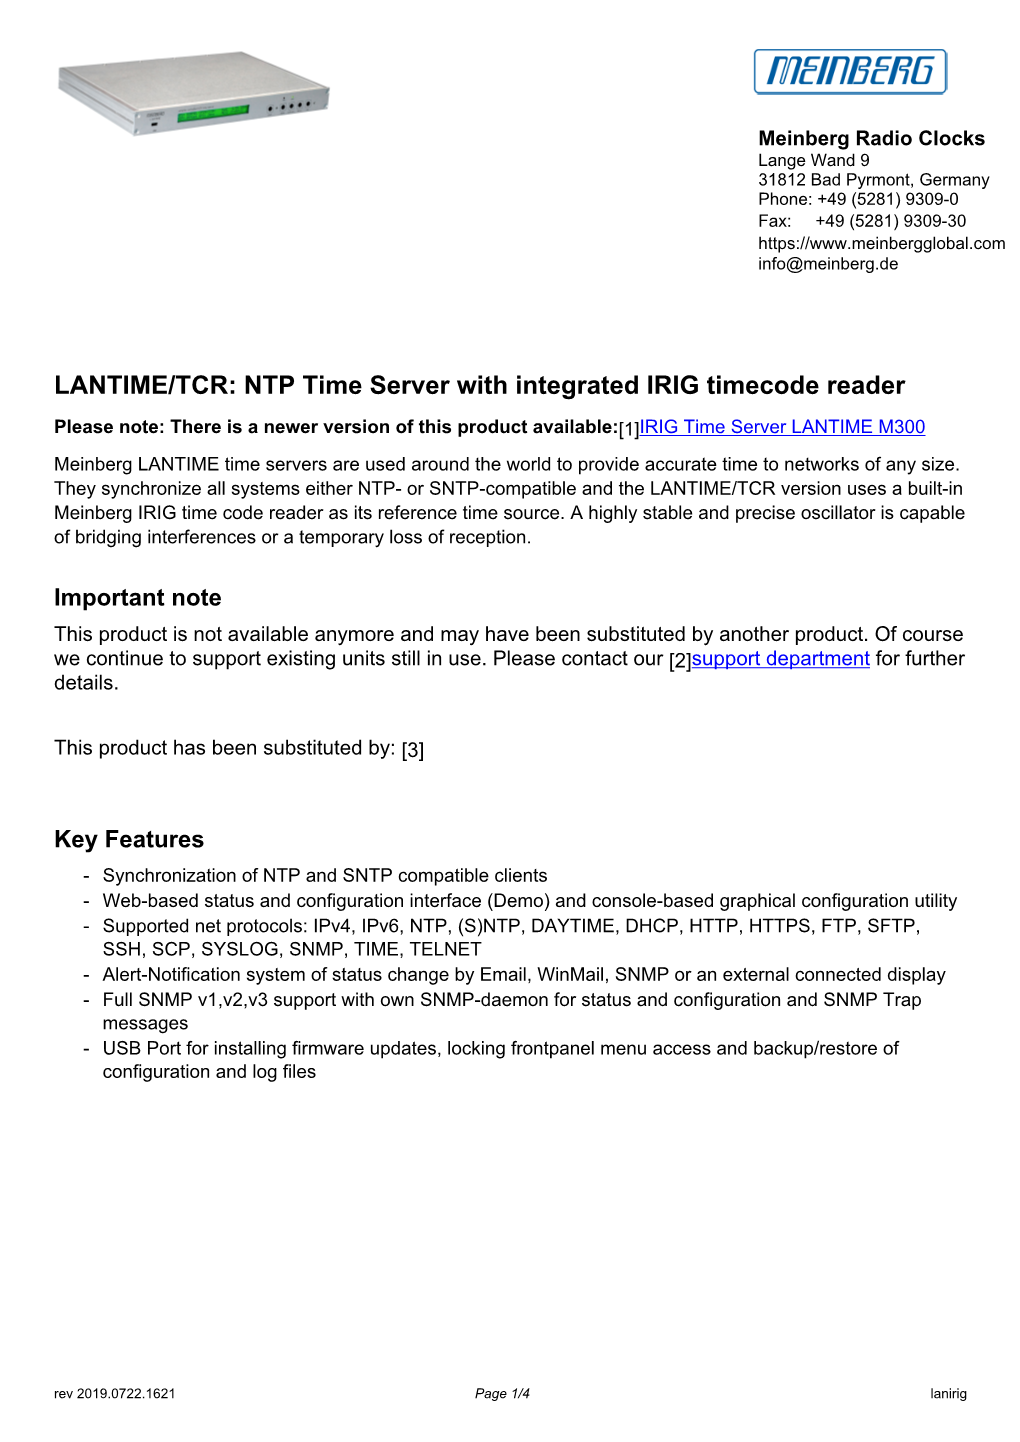 LANTIME/TCR: NTP Time Server with Integrated IRIG Timecode Reader